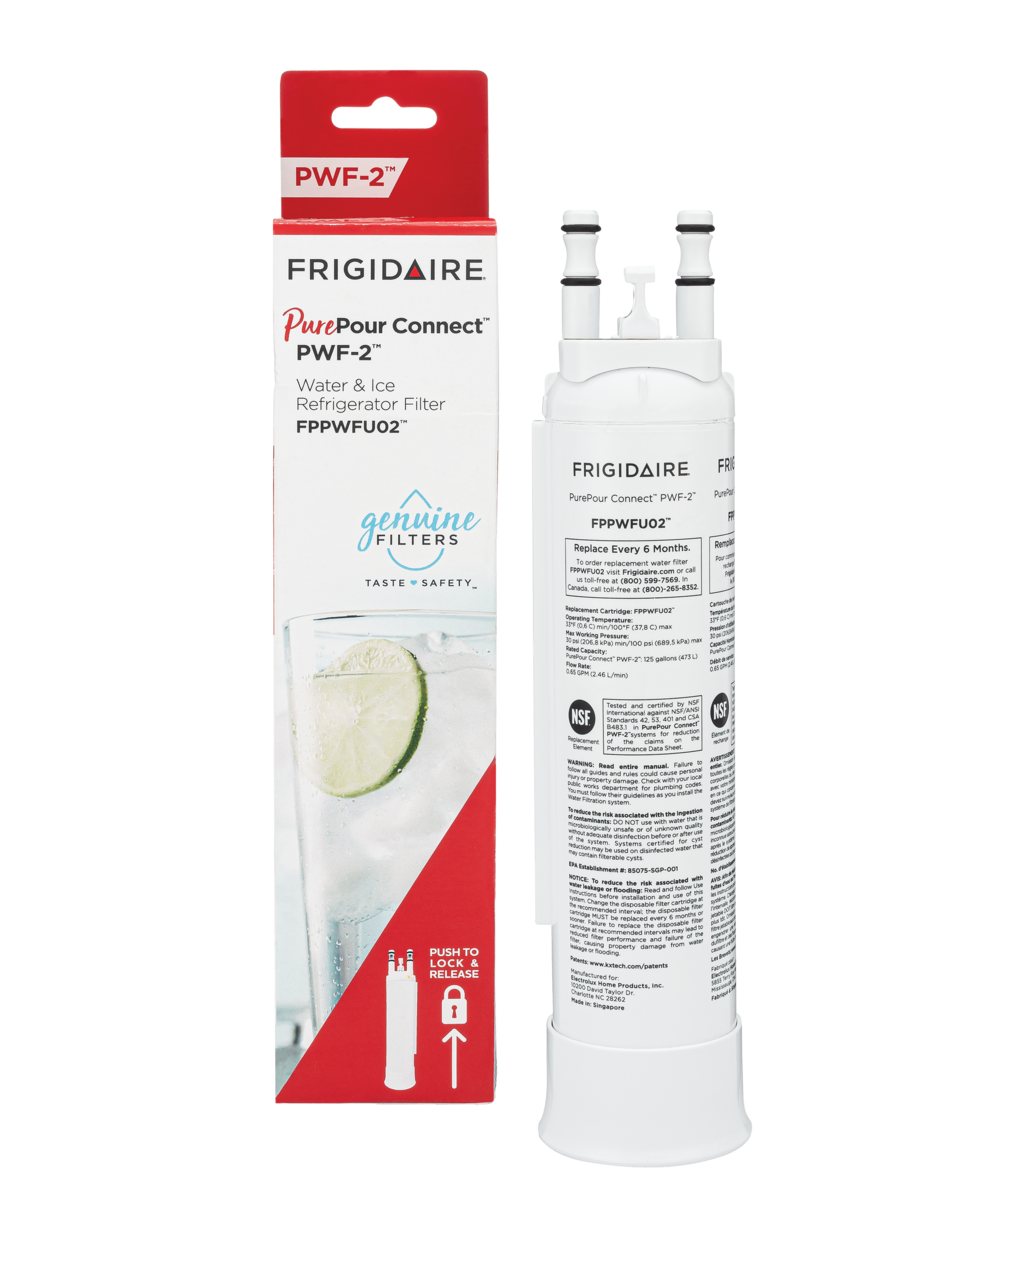 FRIGIDAIRE FPPWFU01 Water Filter for Refrigerators